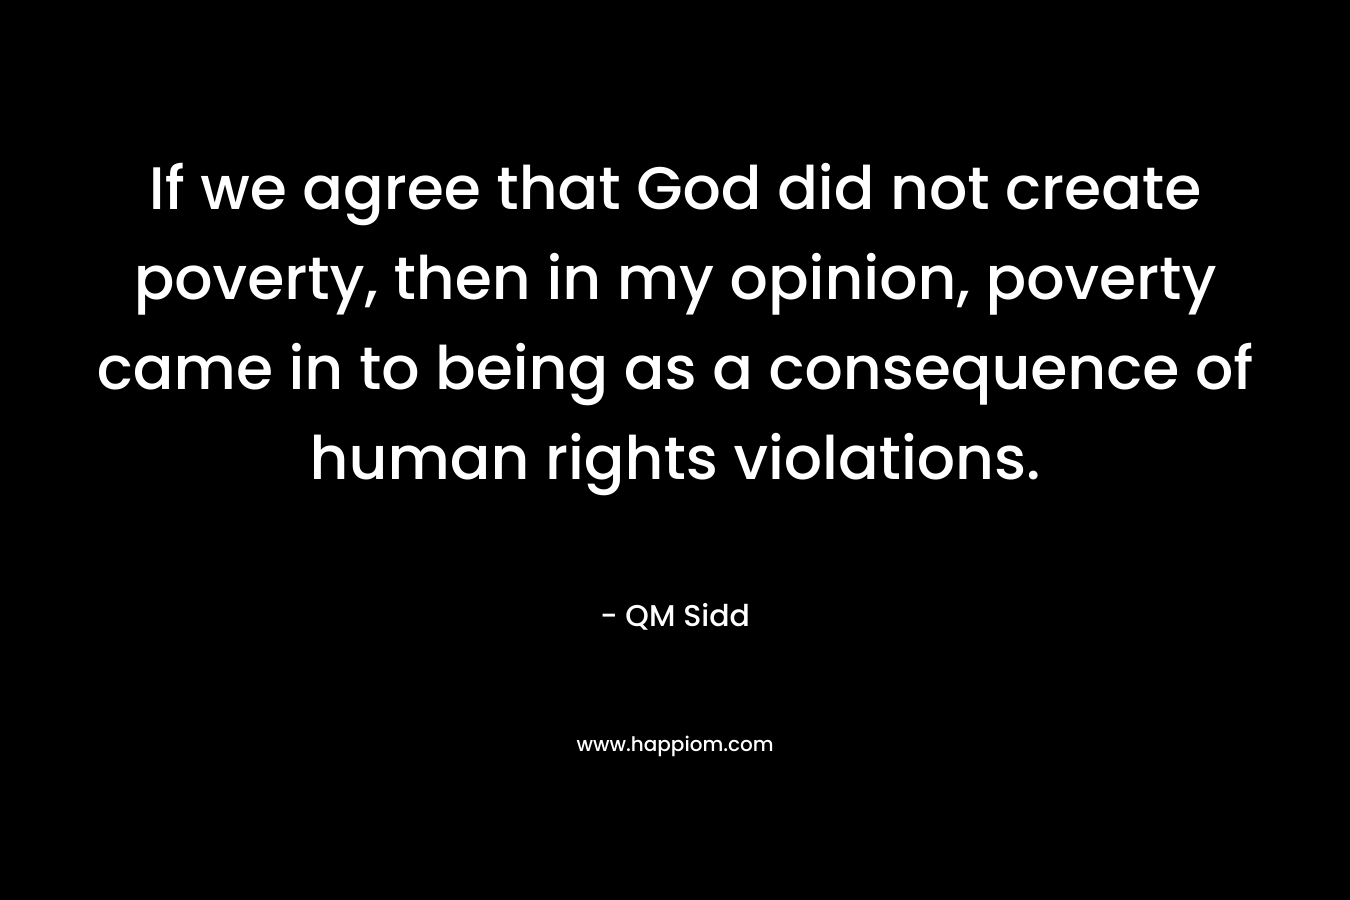 If we agree that God did not create poverty, then in my opinion, poverty came in to being as a consequence of human rights violations. – QM Sidd